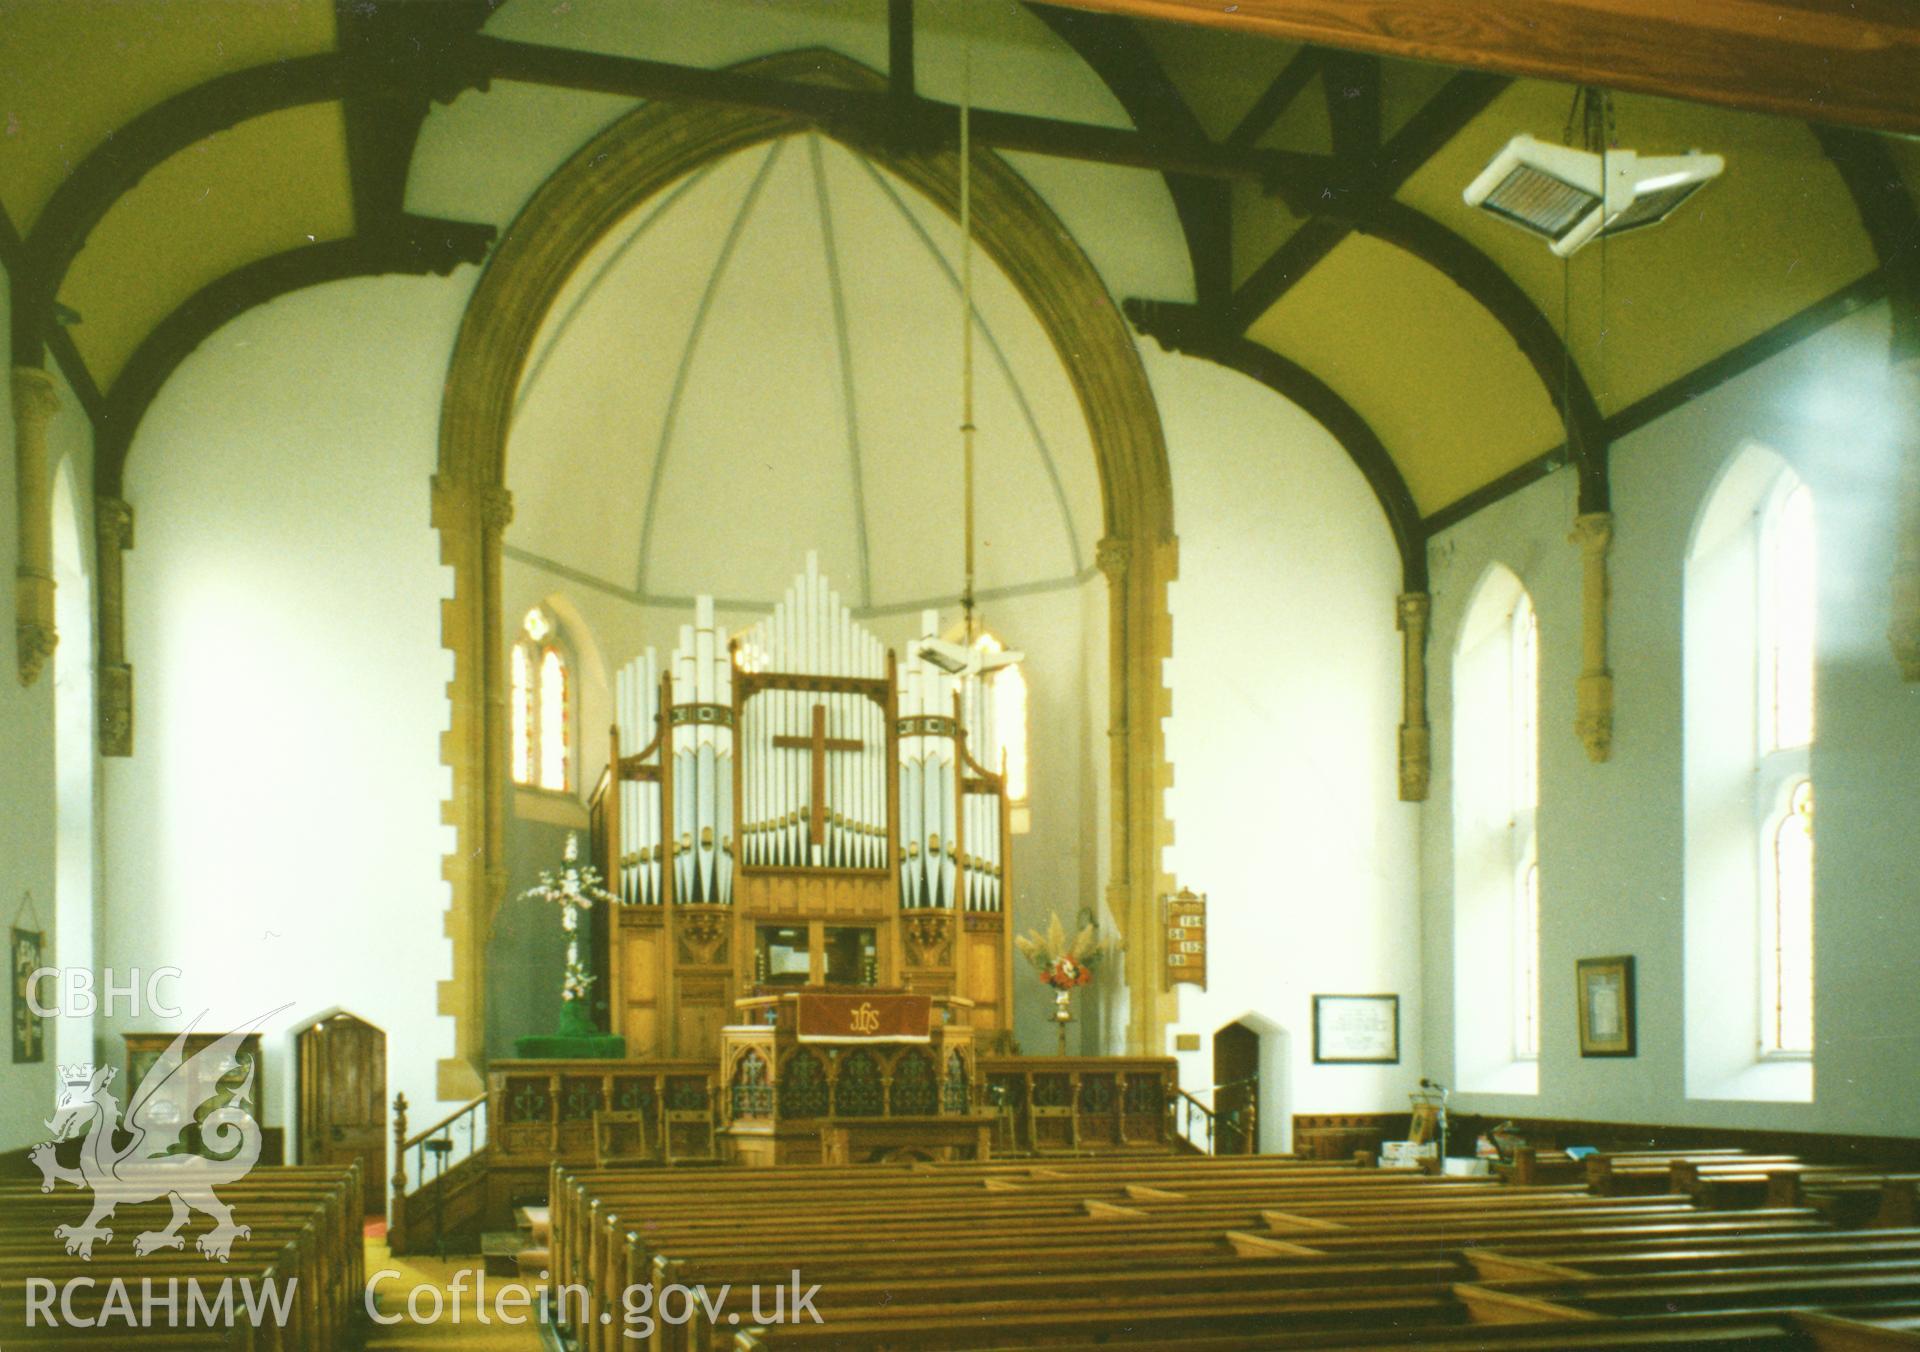 Digital copy of a colour photograph showing an interior view of Deer Park English Baptist Chapel, Tenby, taken by Robert Scourfield, c.1996.